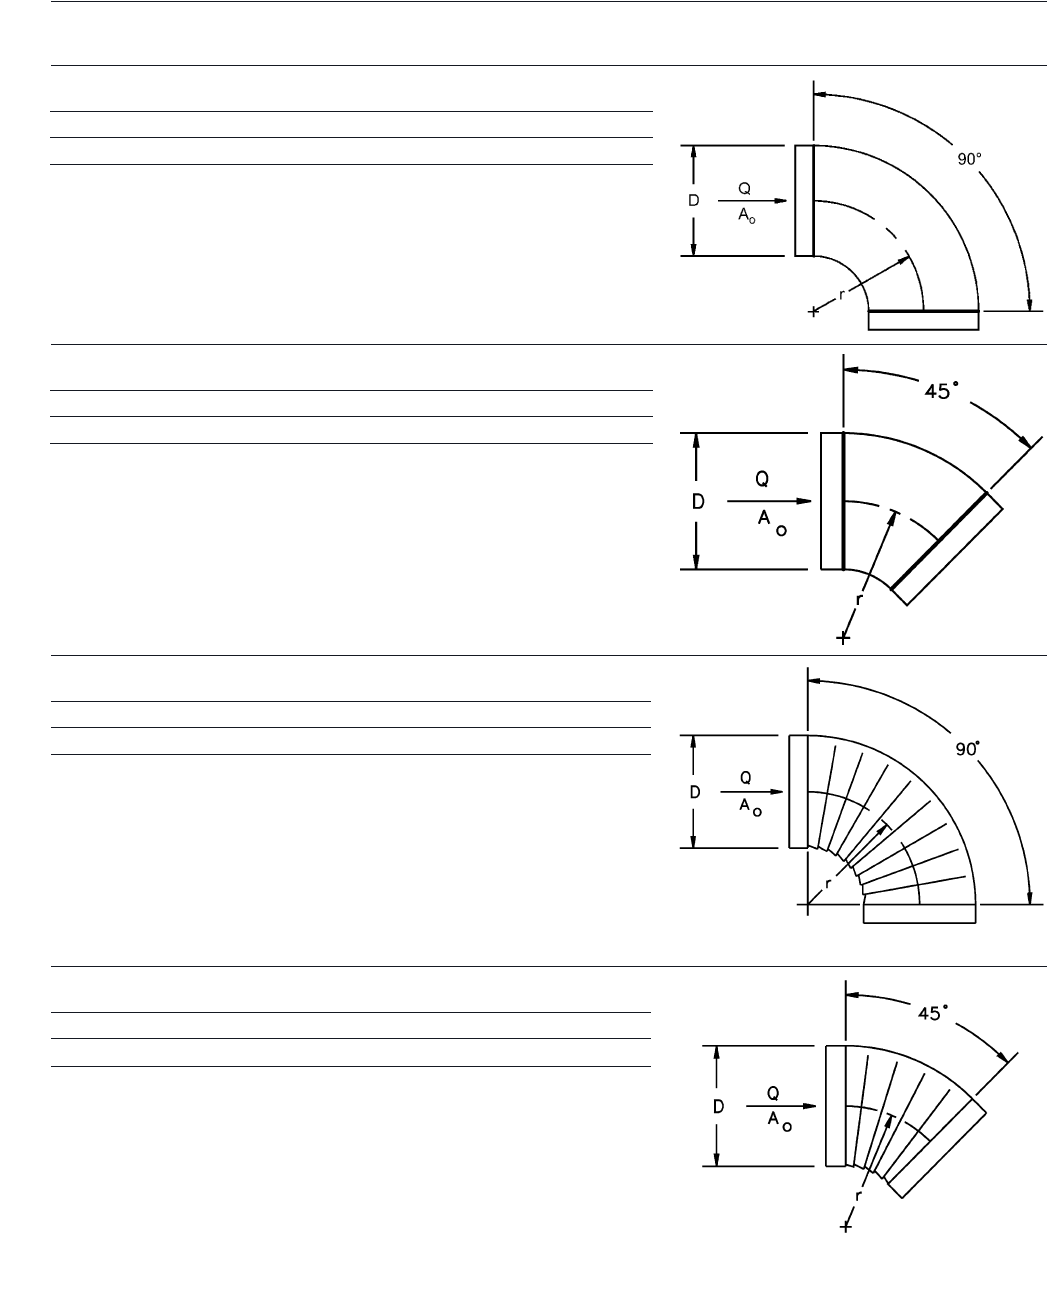 duct fitting loss coefficient tables